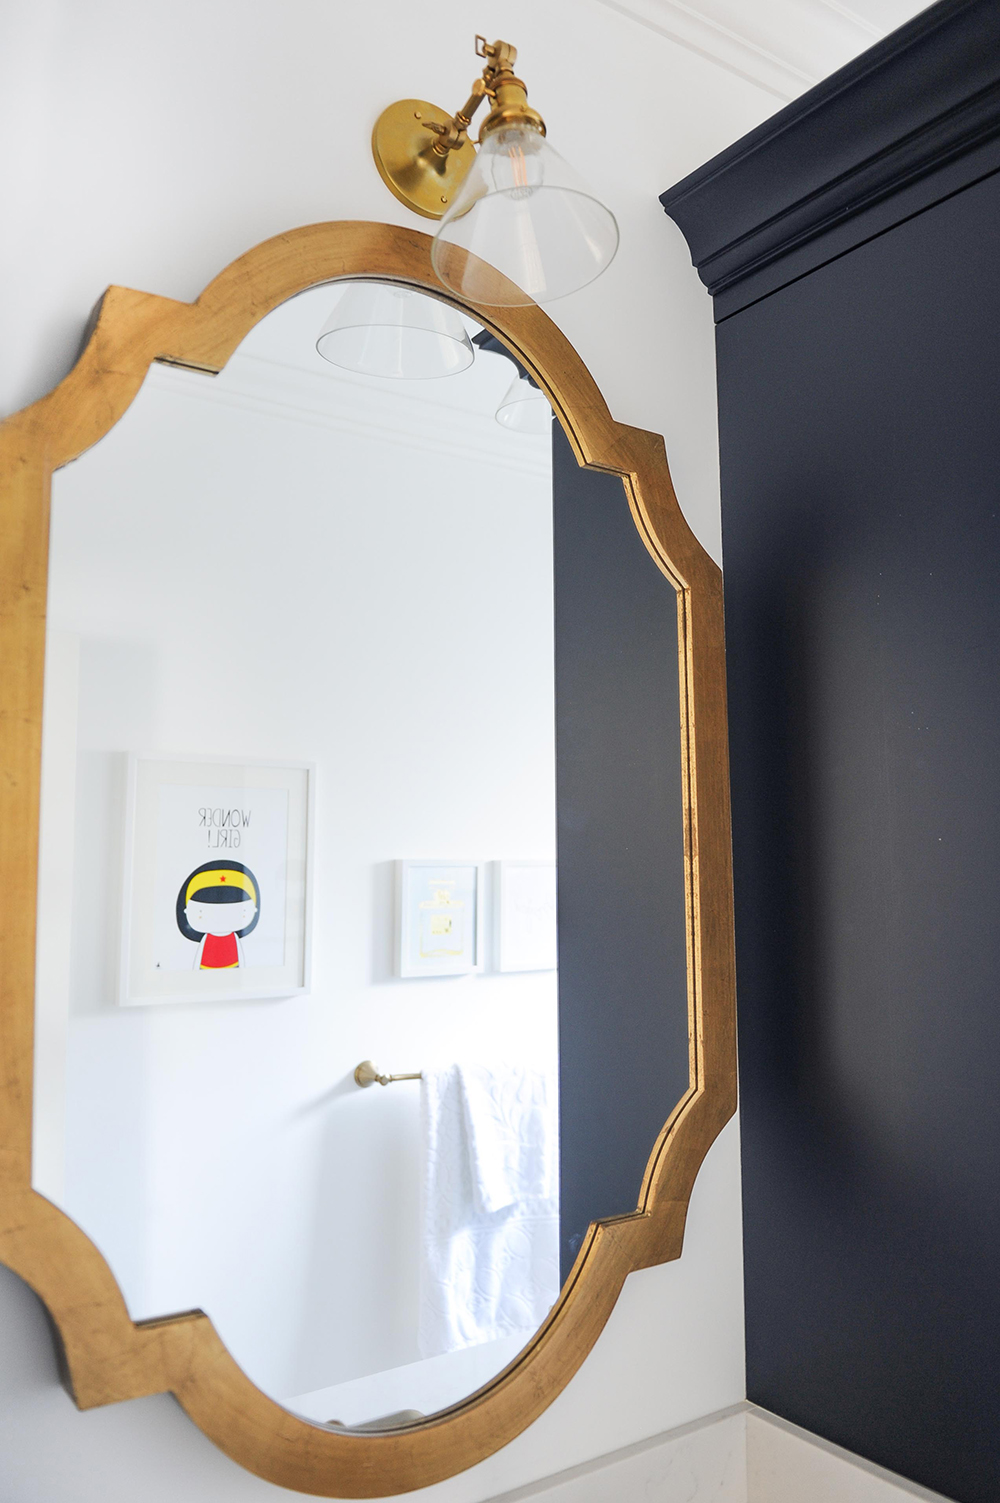 This gold-framed mirror is a welcome departure from the expected flat mirror panel.